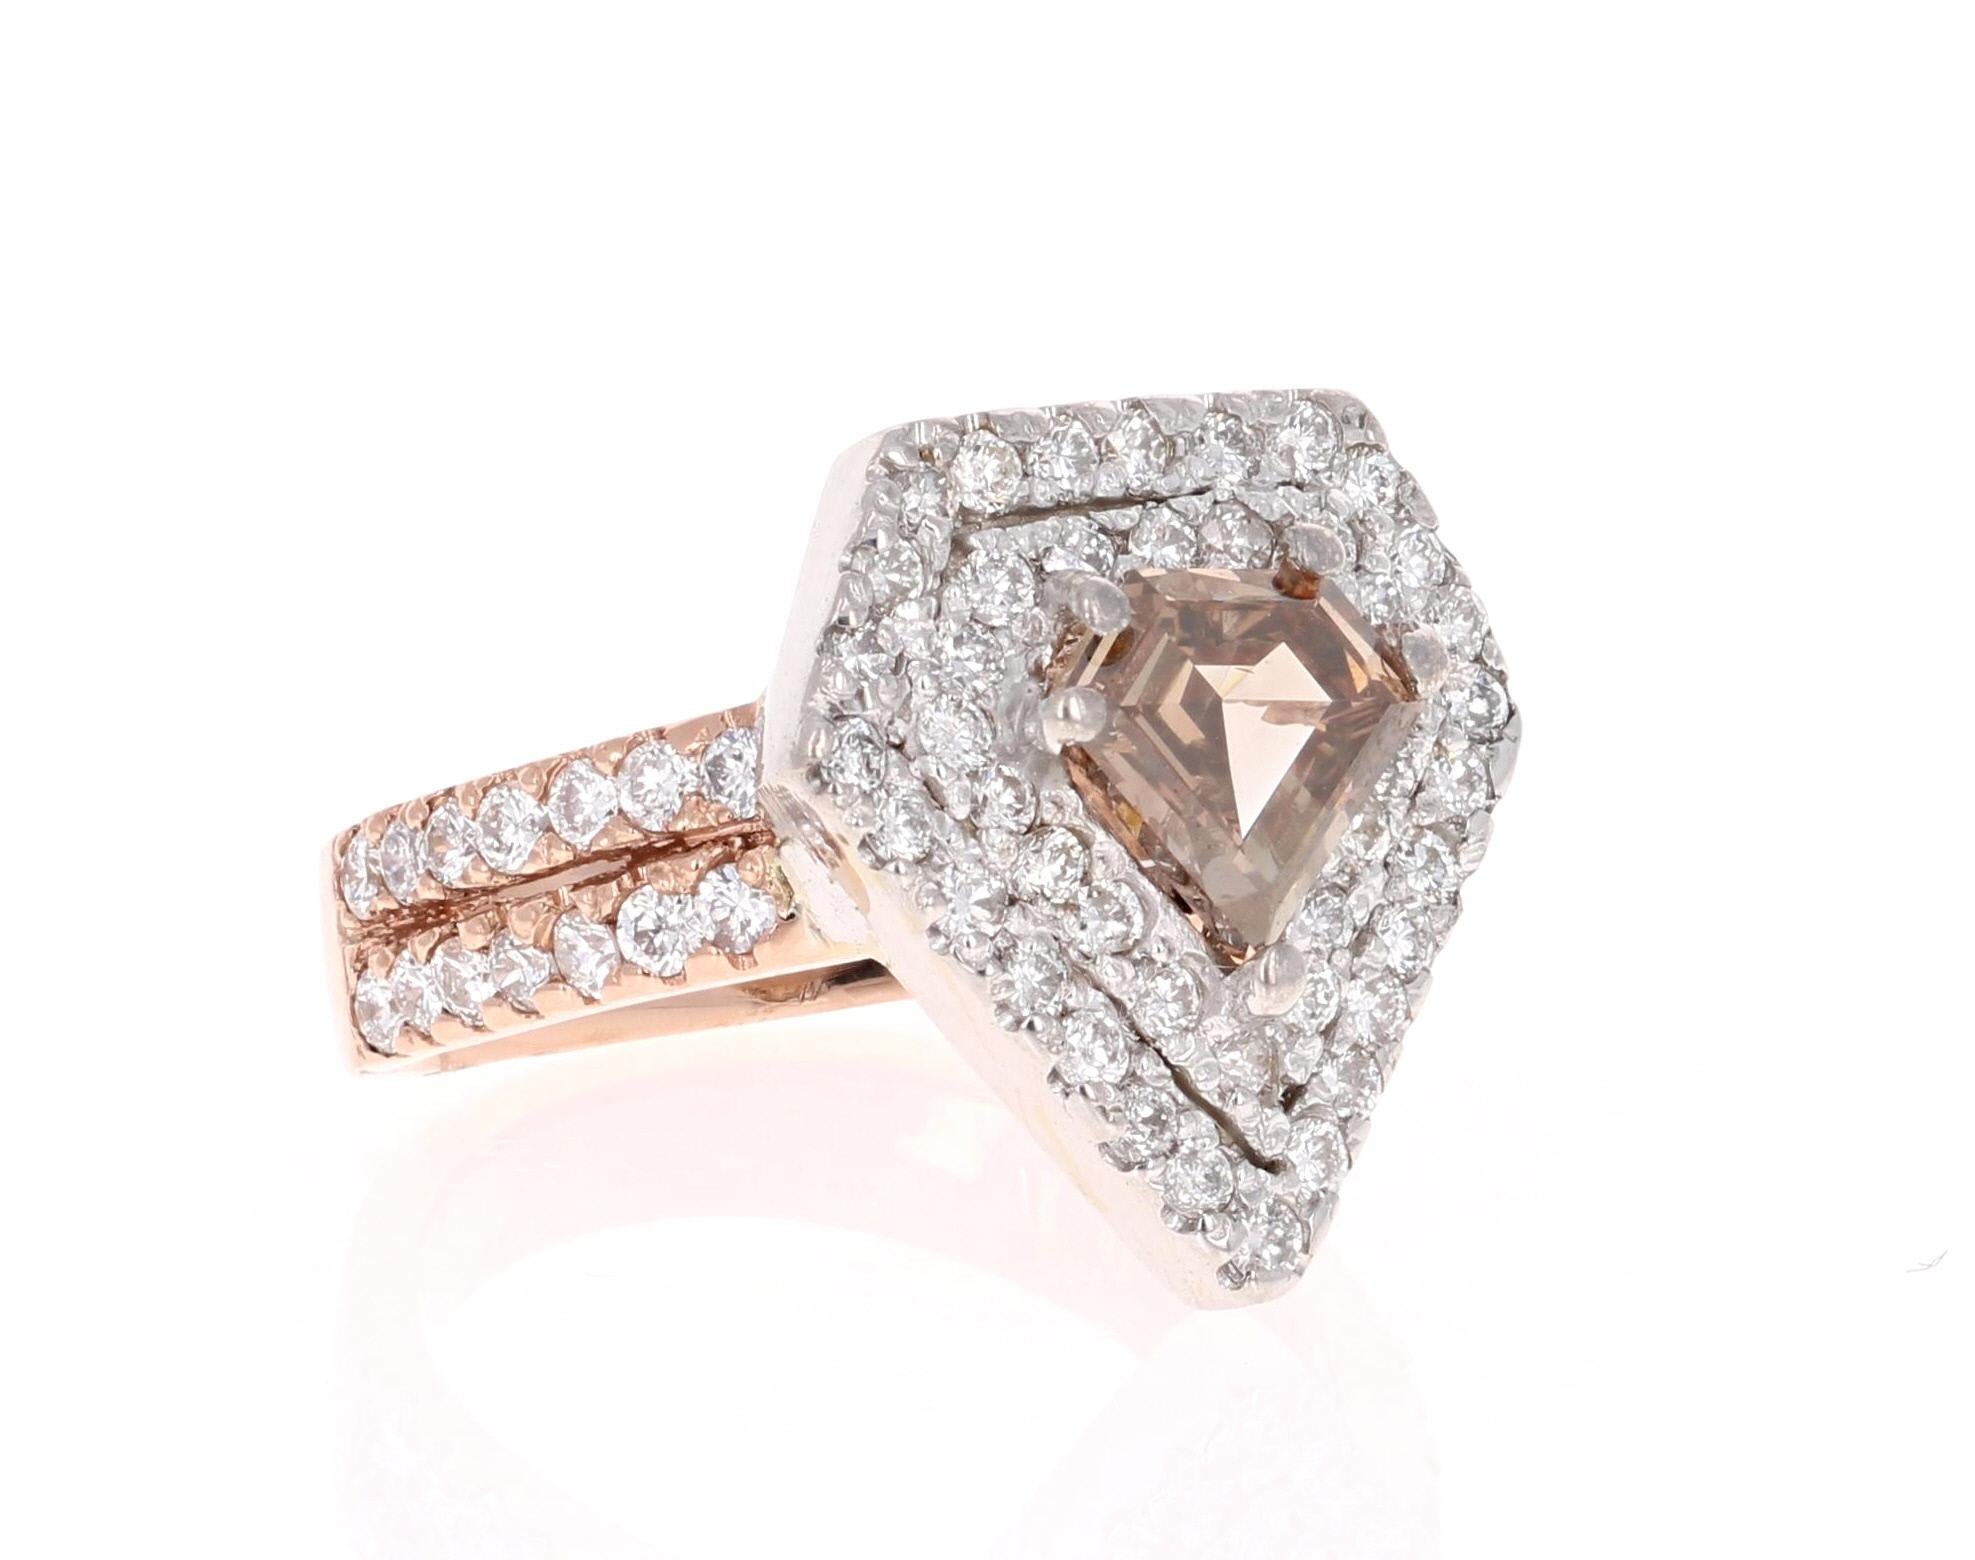 Stunning Scintillating and Unique! This two-toned diamond ring will leave a lasting impression! 

The center stone is a fancy colored Champagne Diamond Cut Diamond weighing 0.97 carats.  It is surrounded by a halo in the shape of a diamond and has